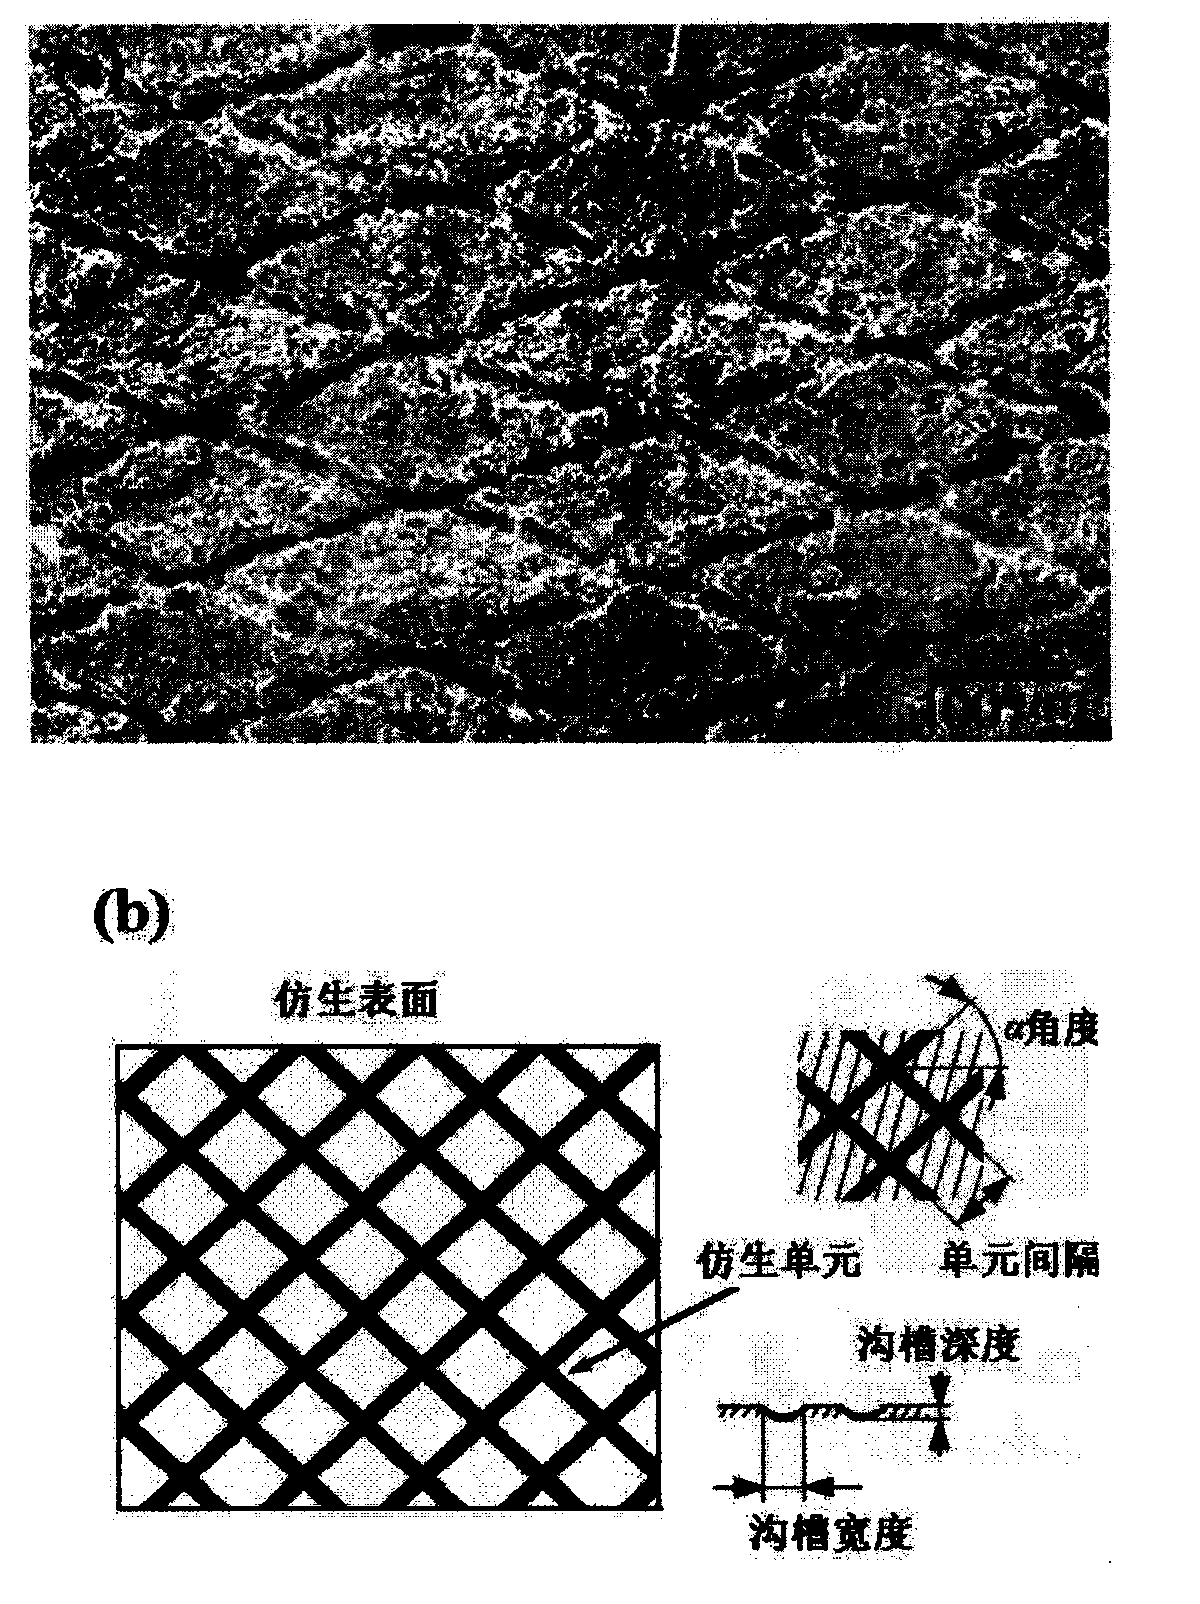 Method and device for compositely preparing surface-layer biomimetic structure by laser